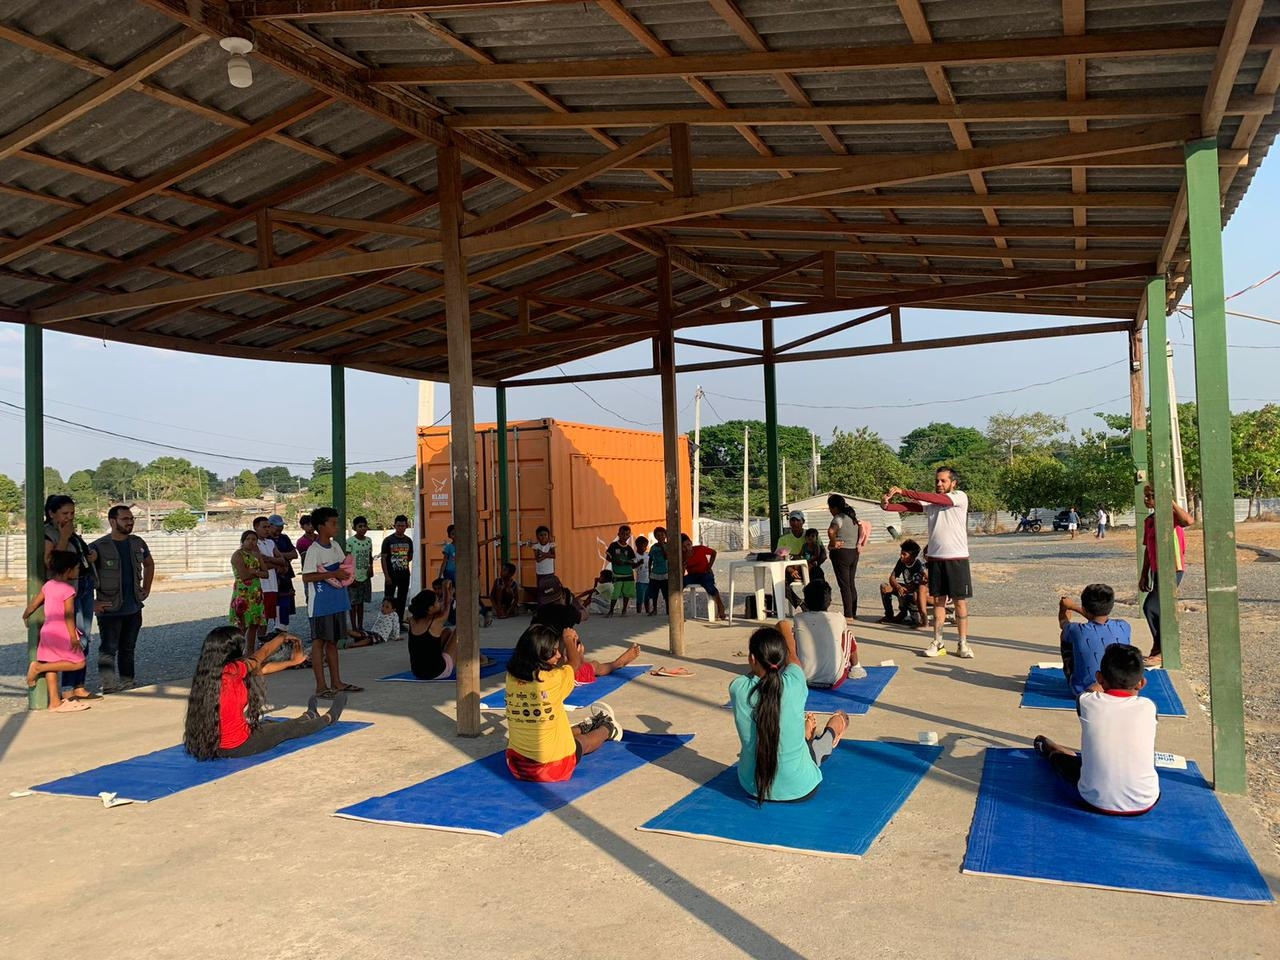 First yoga session in front of Boa Vista clubhouse after arrival of container